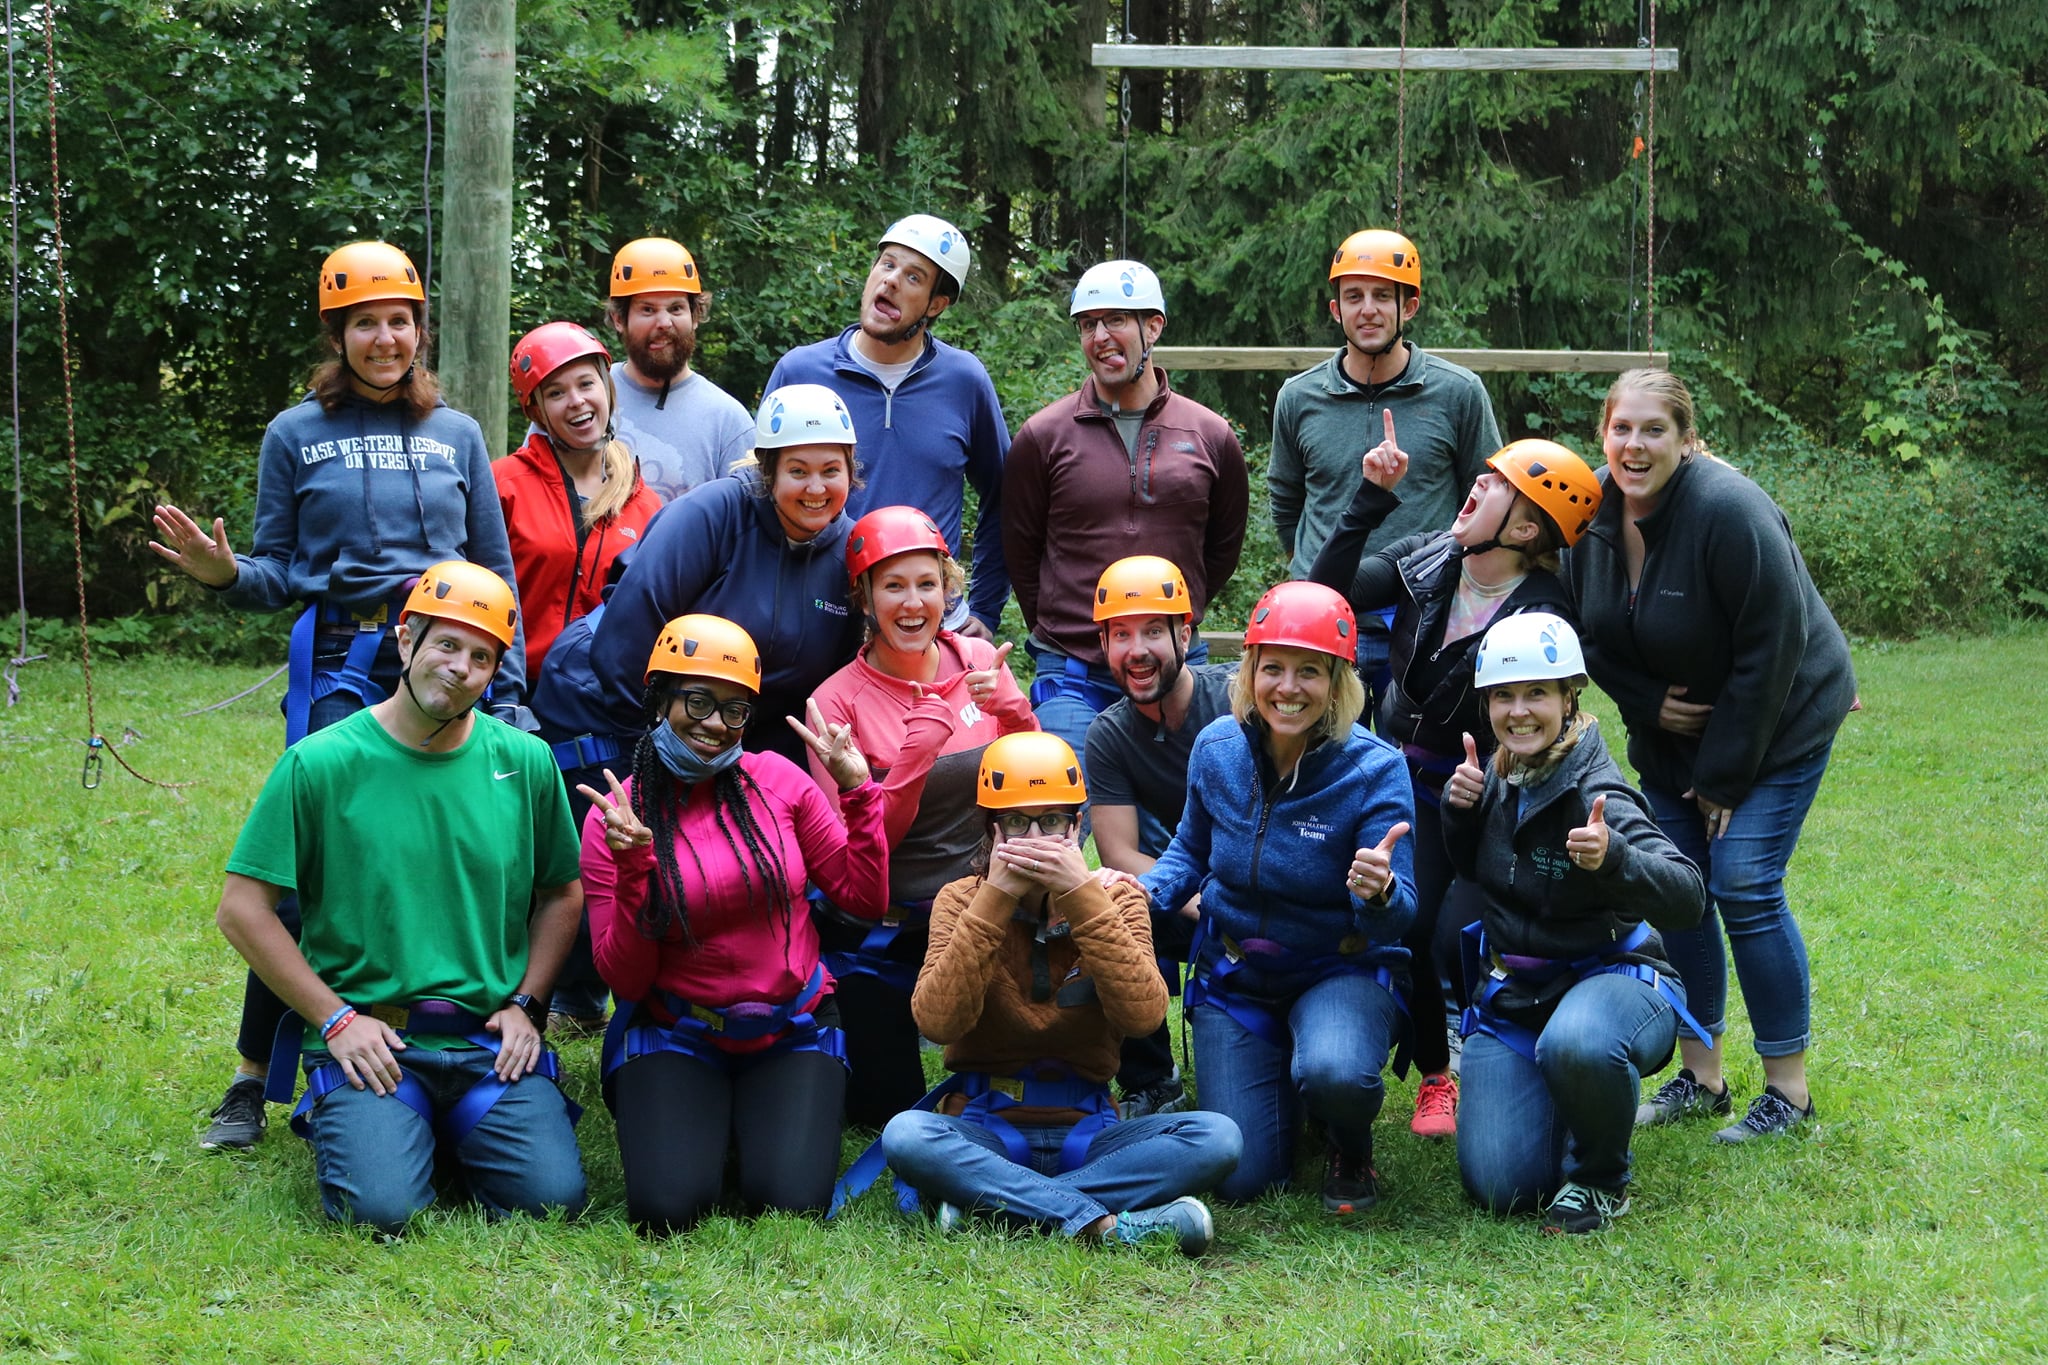 High Ropes Group photo